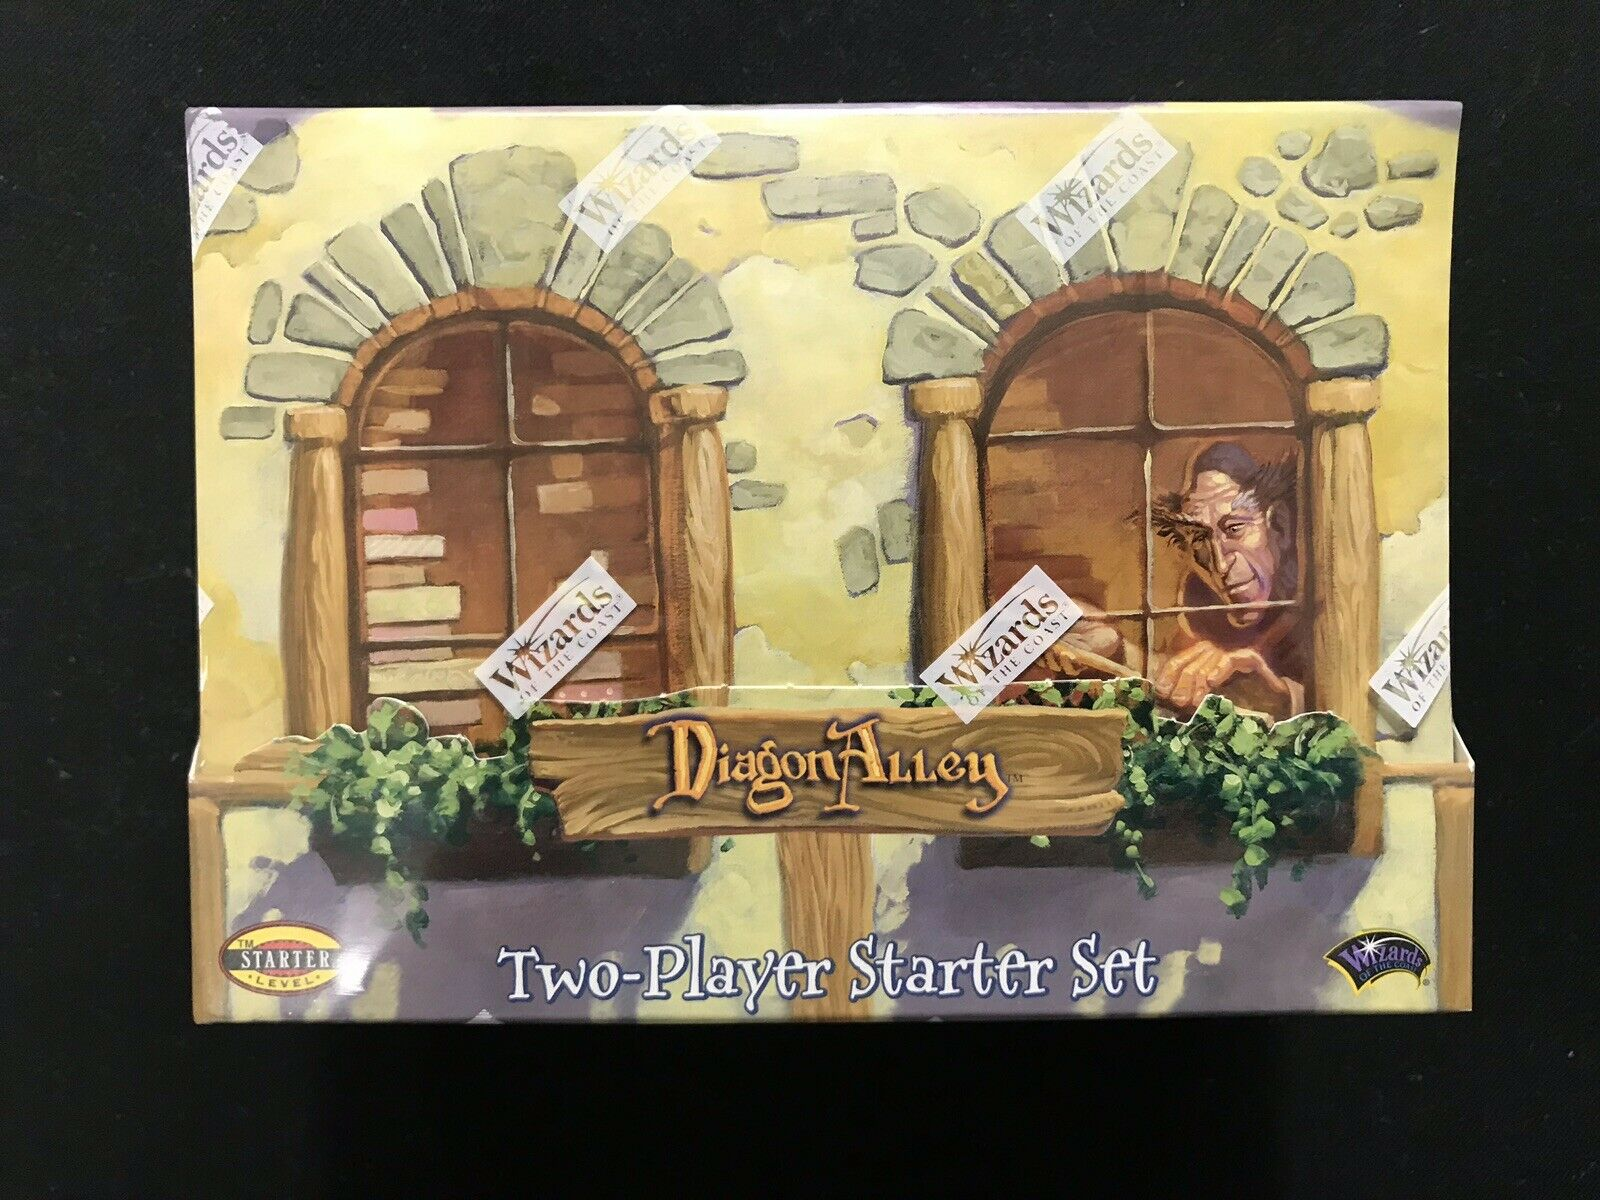 Harry Potter Diagon Alley 2-Player Starter 8ct Display Box